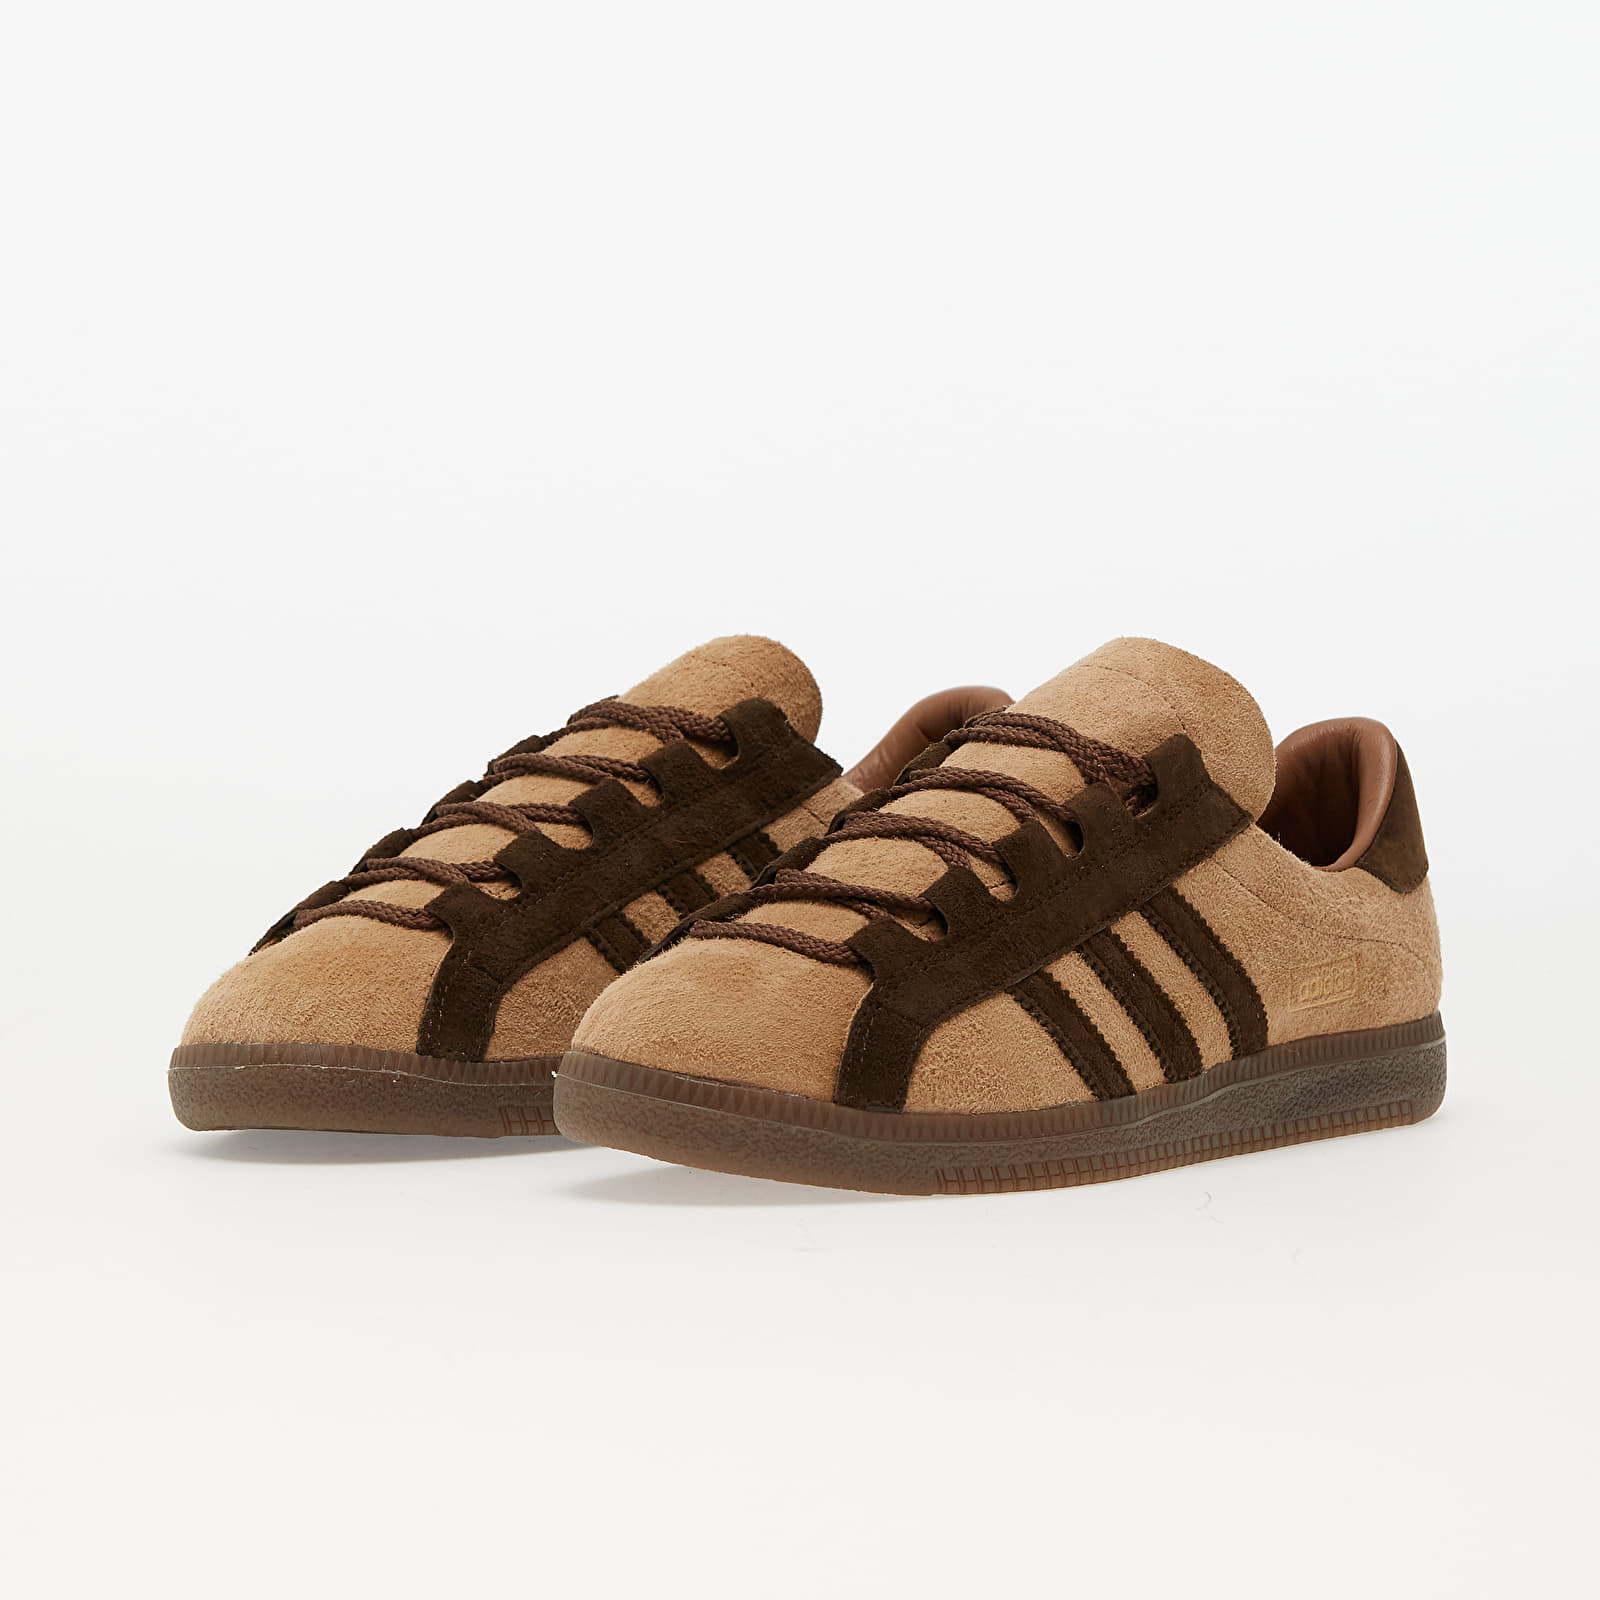 Samba low trainers Adidas Brown size 44.5 EU in Suede - 40844243